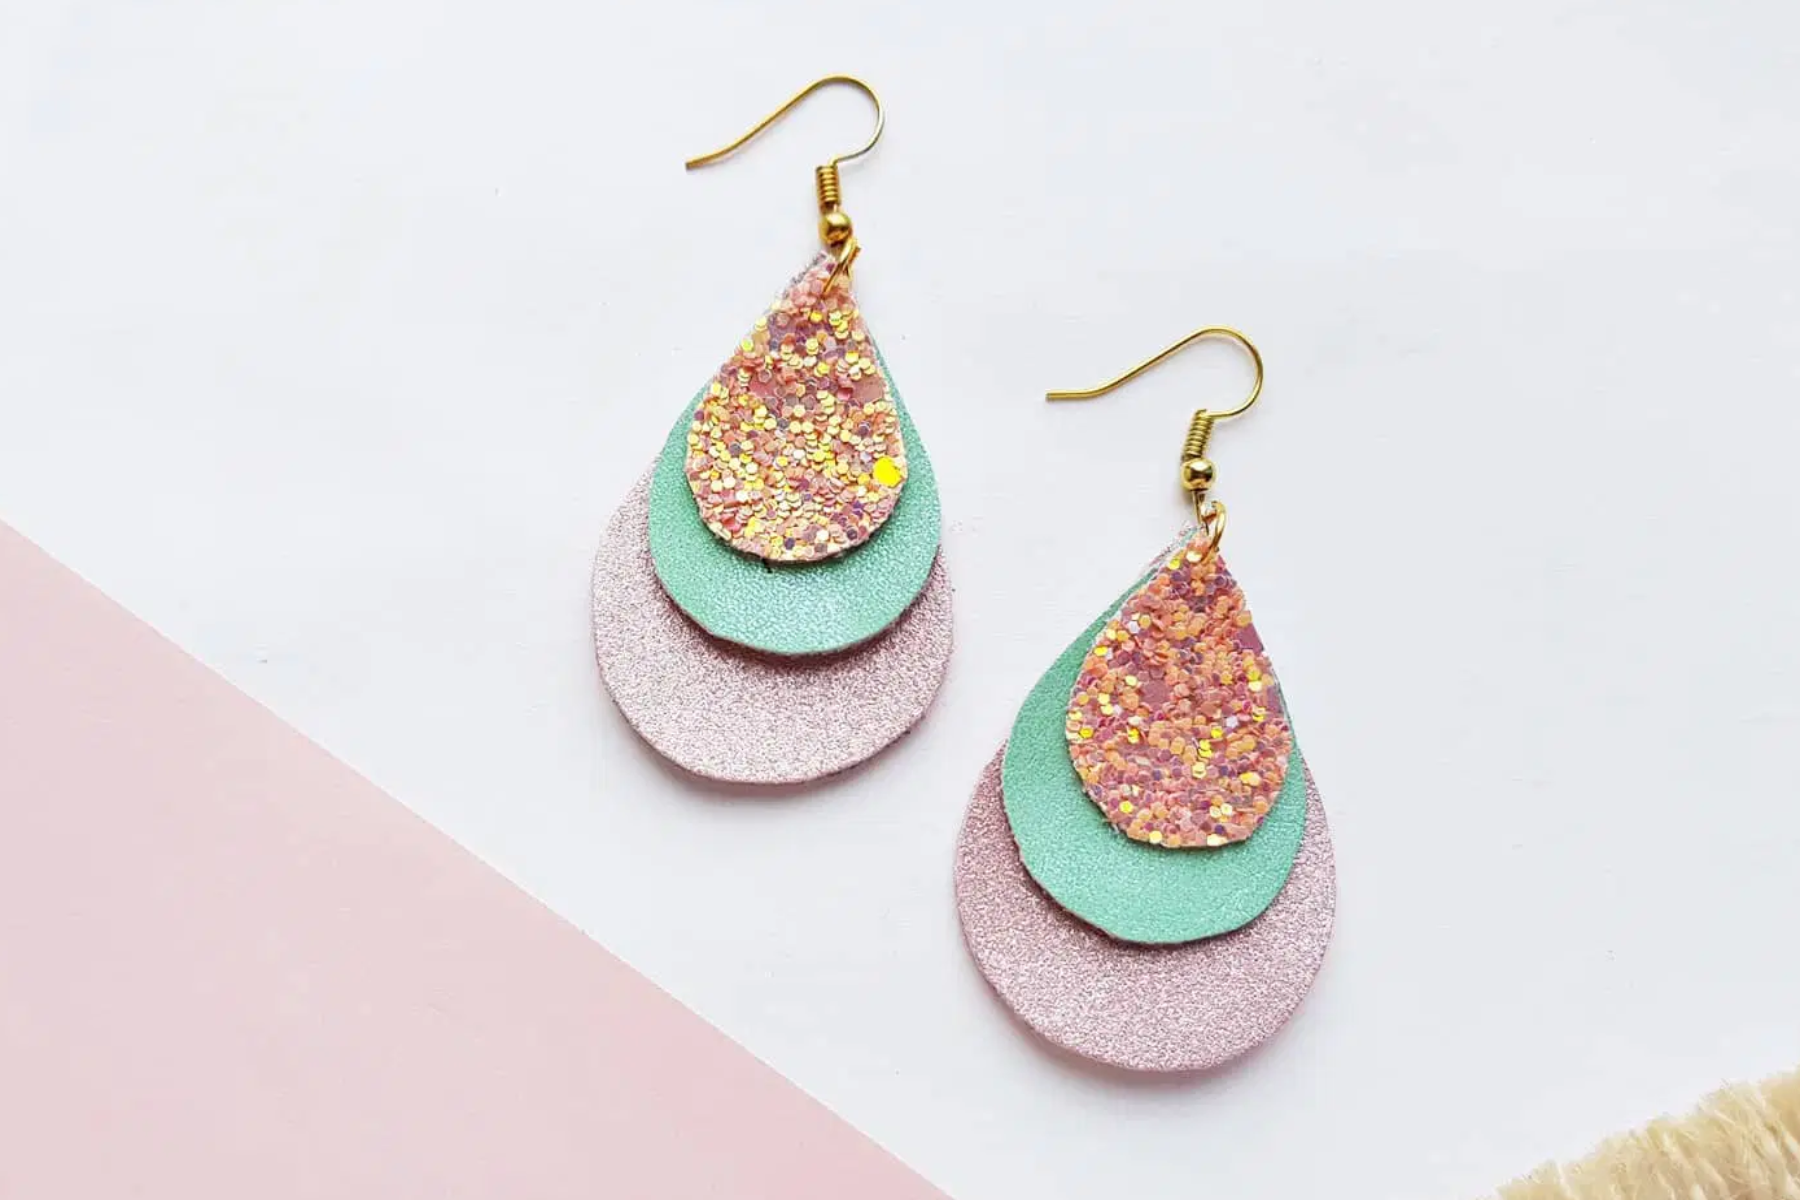 Leather Earrings - Why Leather Comes Out On Top